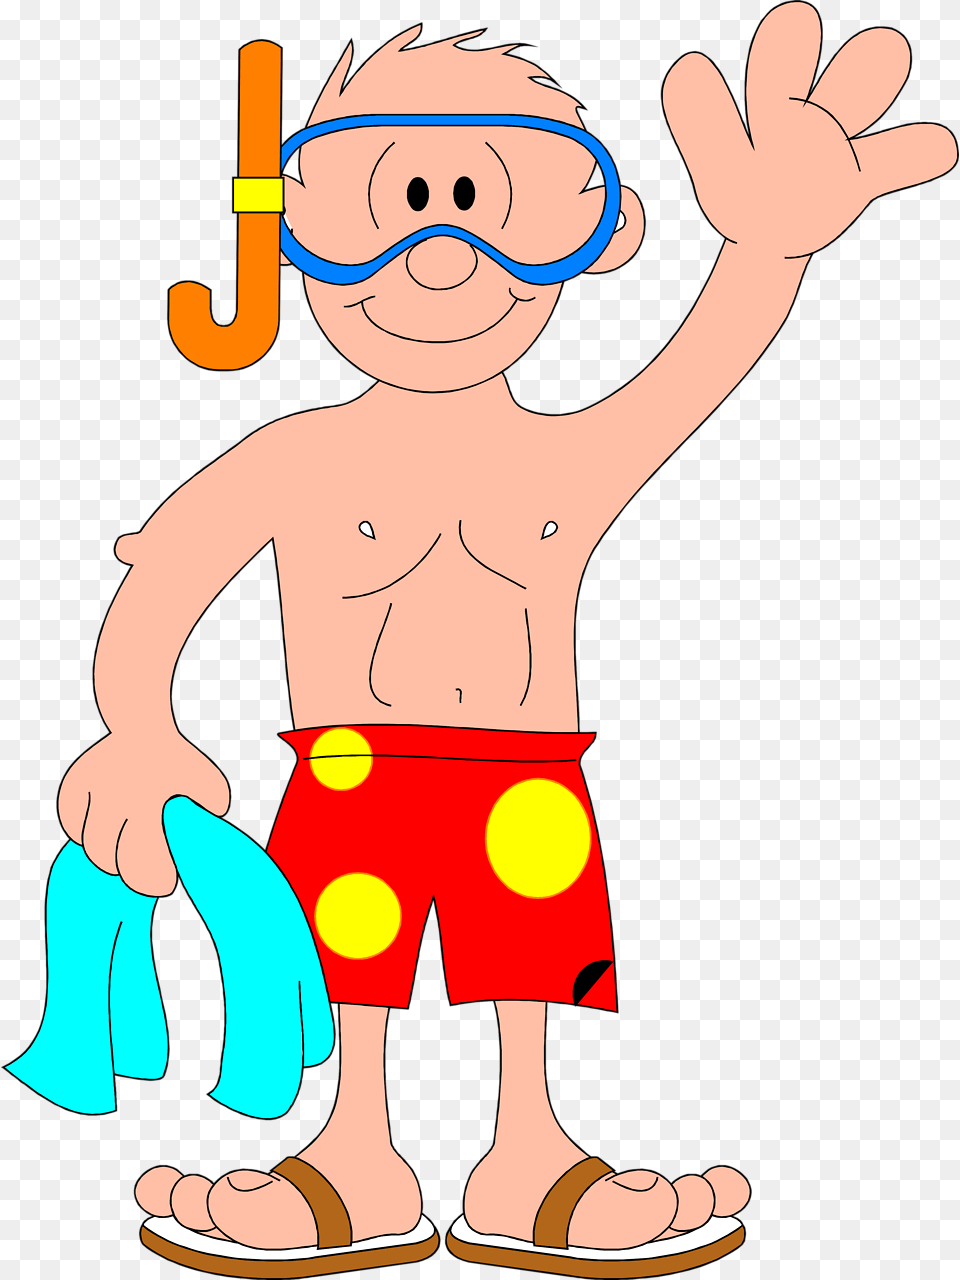 Stock Photos Illustration Of A Man With A Snorkel, Baby, Person, Clothing, Shorts Free Png